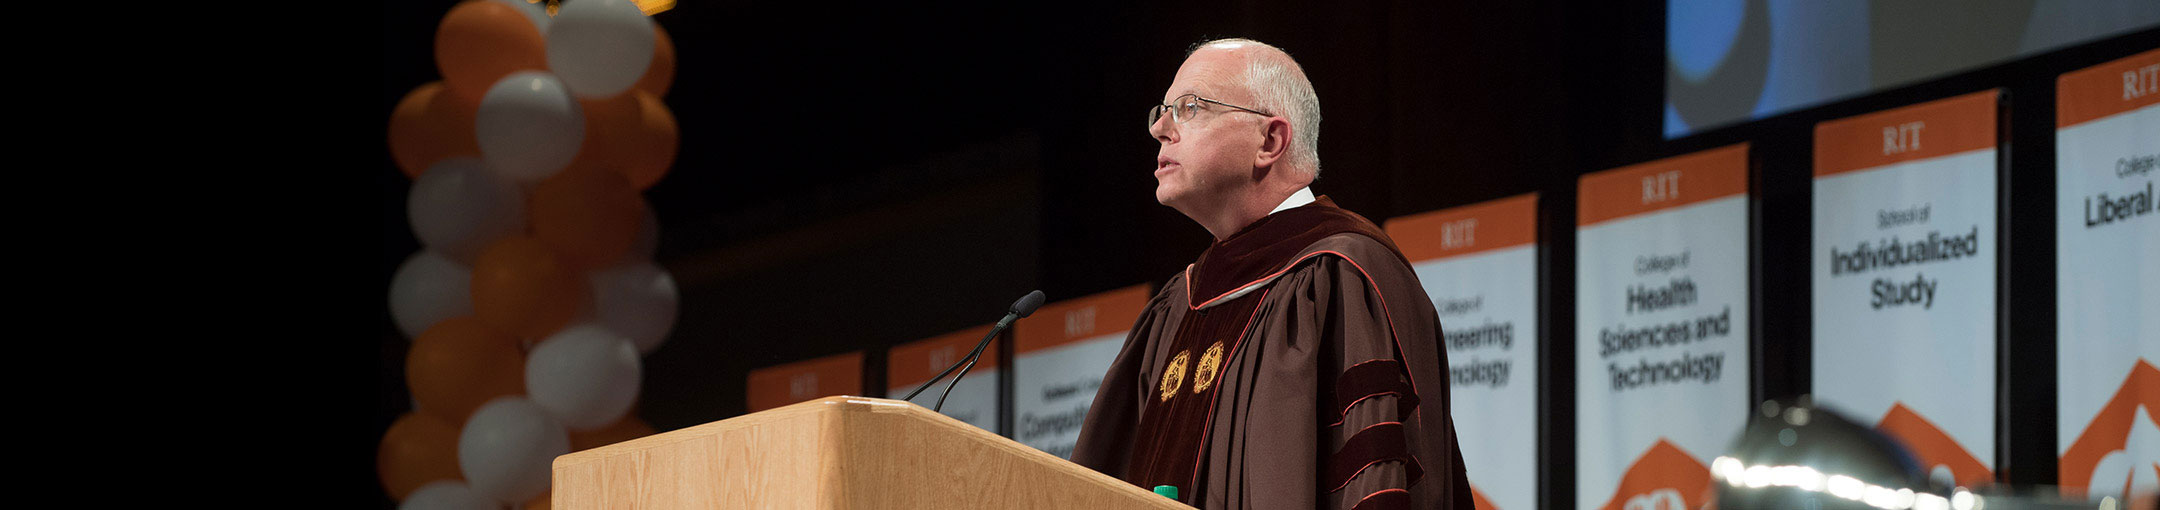 President Munson addressing a group at a graduation ceremony